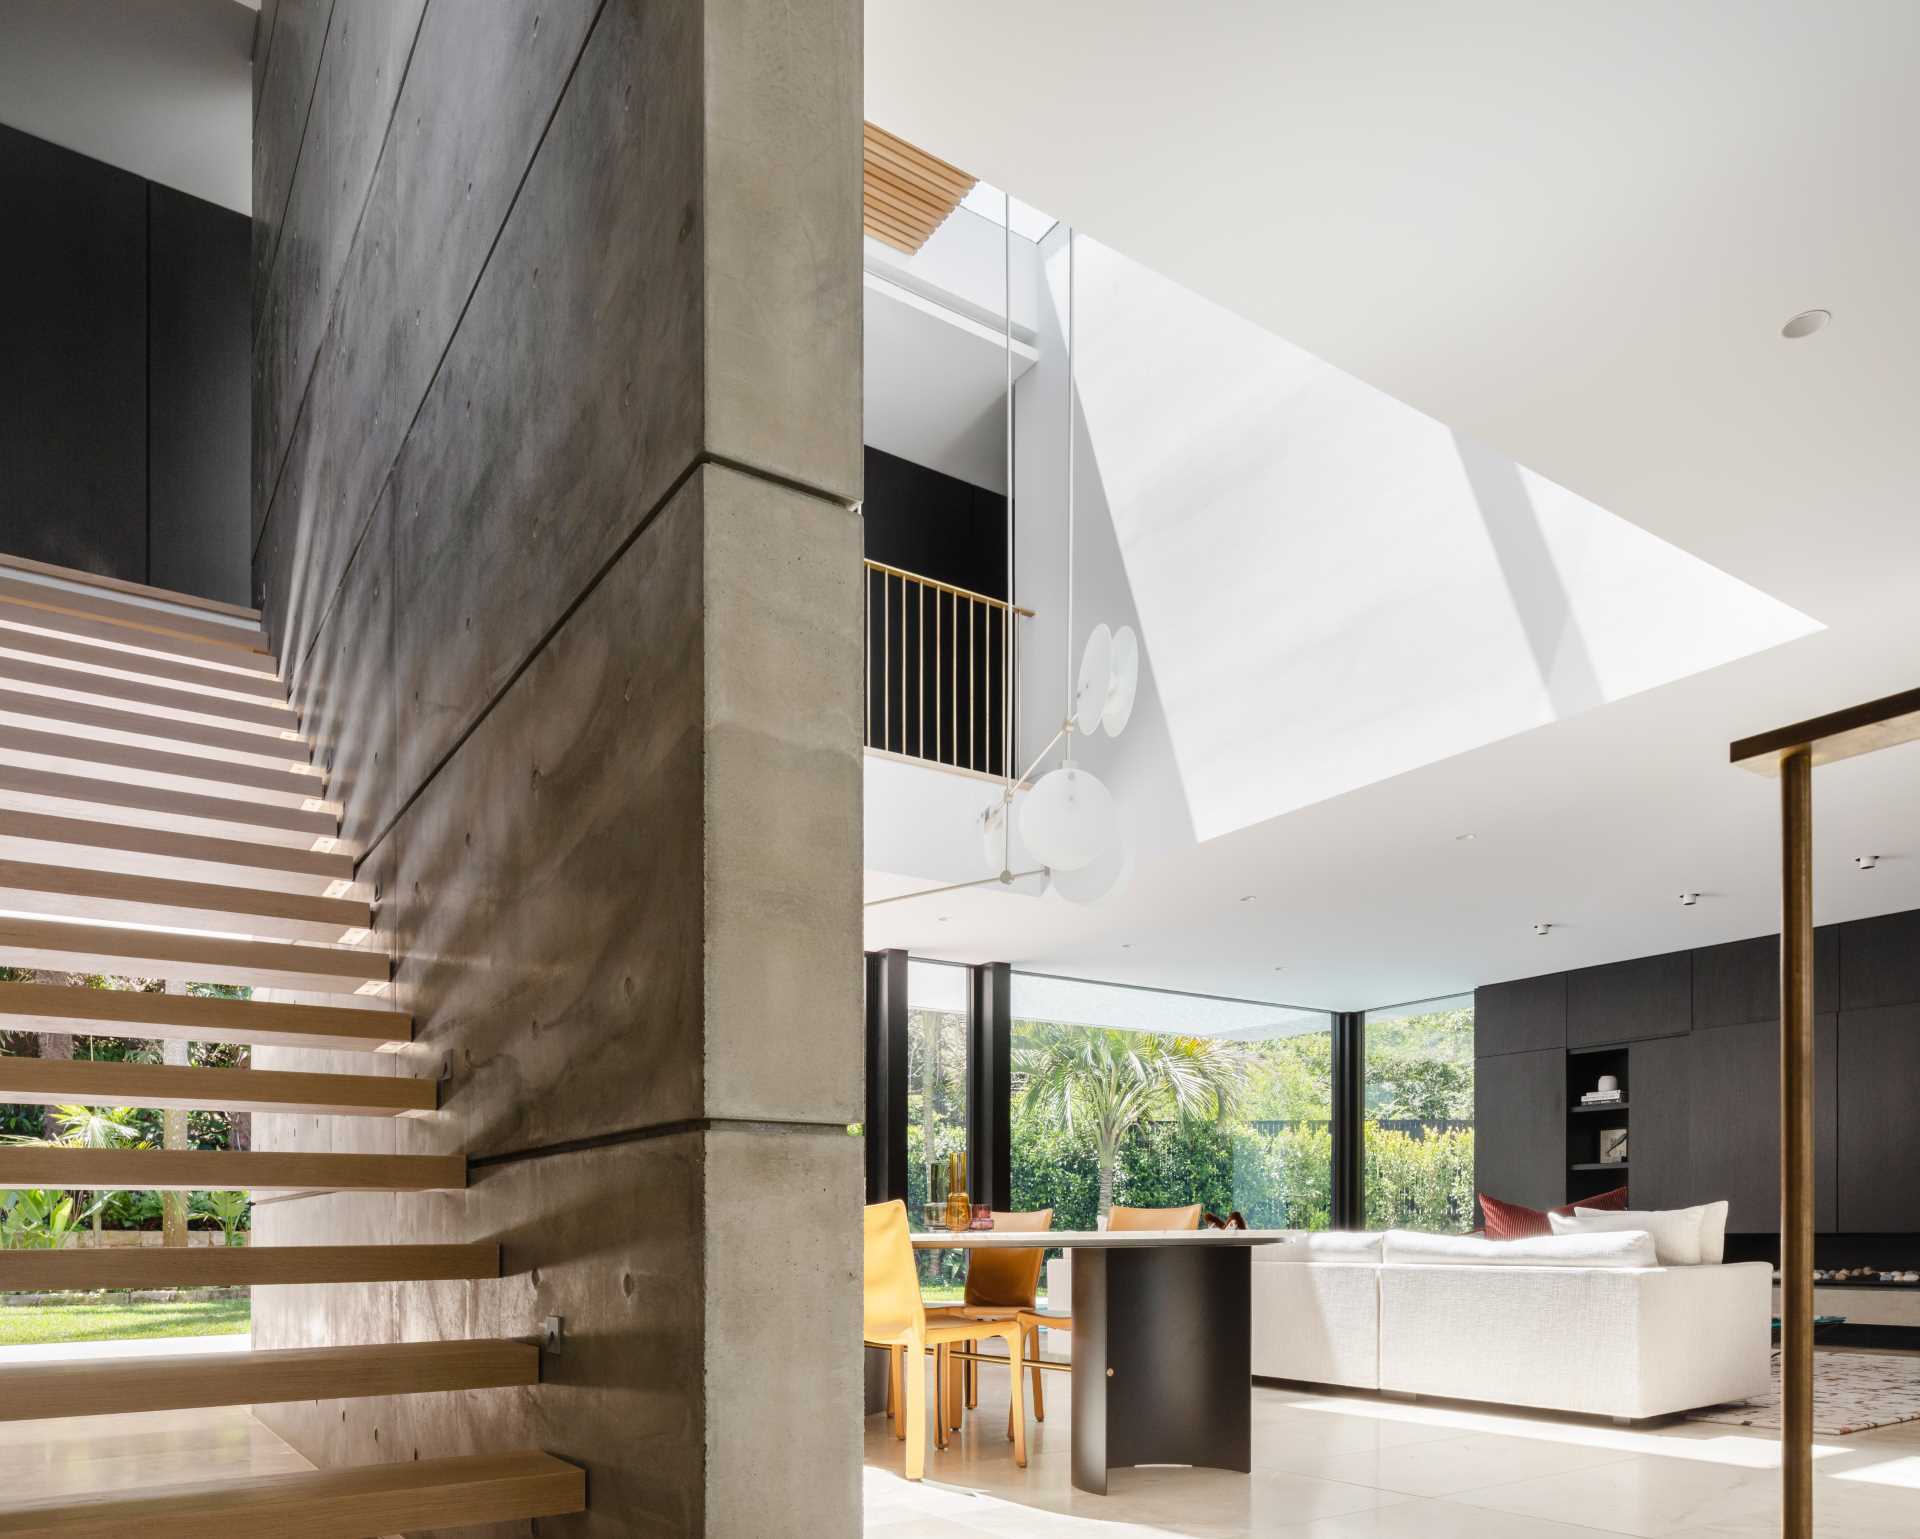 A modern house with concrete walls, limestone tiled flooring, and wood stairs.